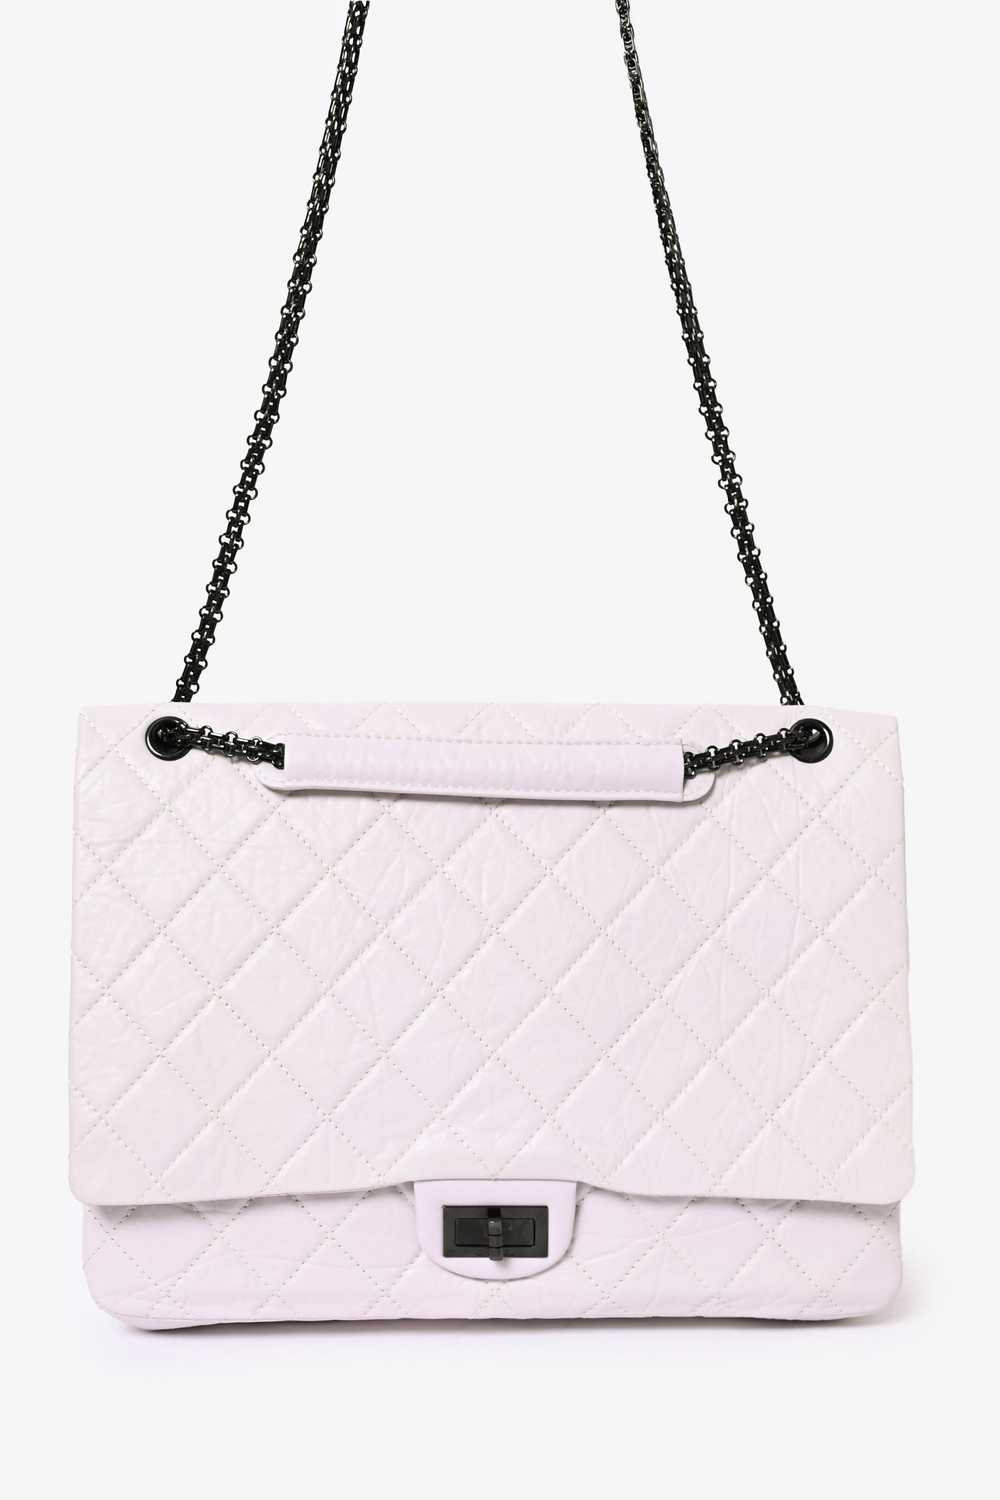 Pre-Loved Chanel™ 2008/9 Grey Leather Quilted 2.5… - image 1